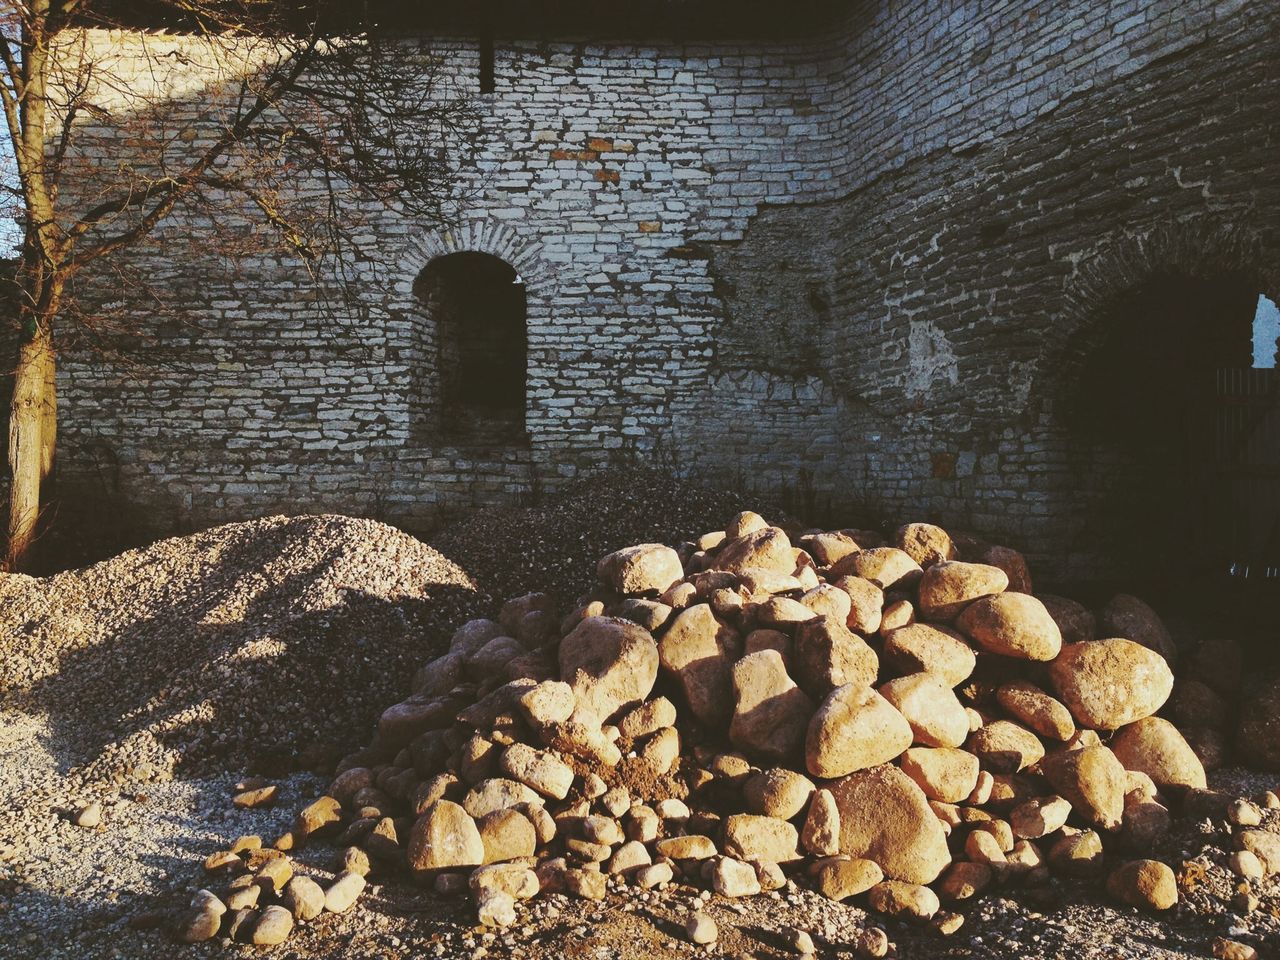 built structure, architecture, reflection, stone - object, water, stone wall, rock - object, abandoned, old, connection, wall - building feature, damaged, day, no people, puddle, outdoors, stone, brick wall, deterioration, stone material